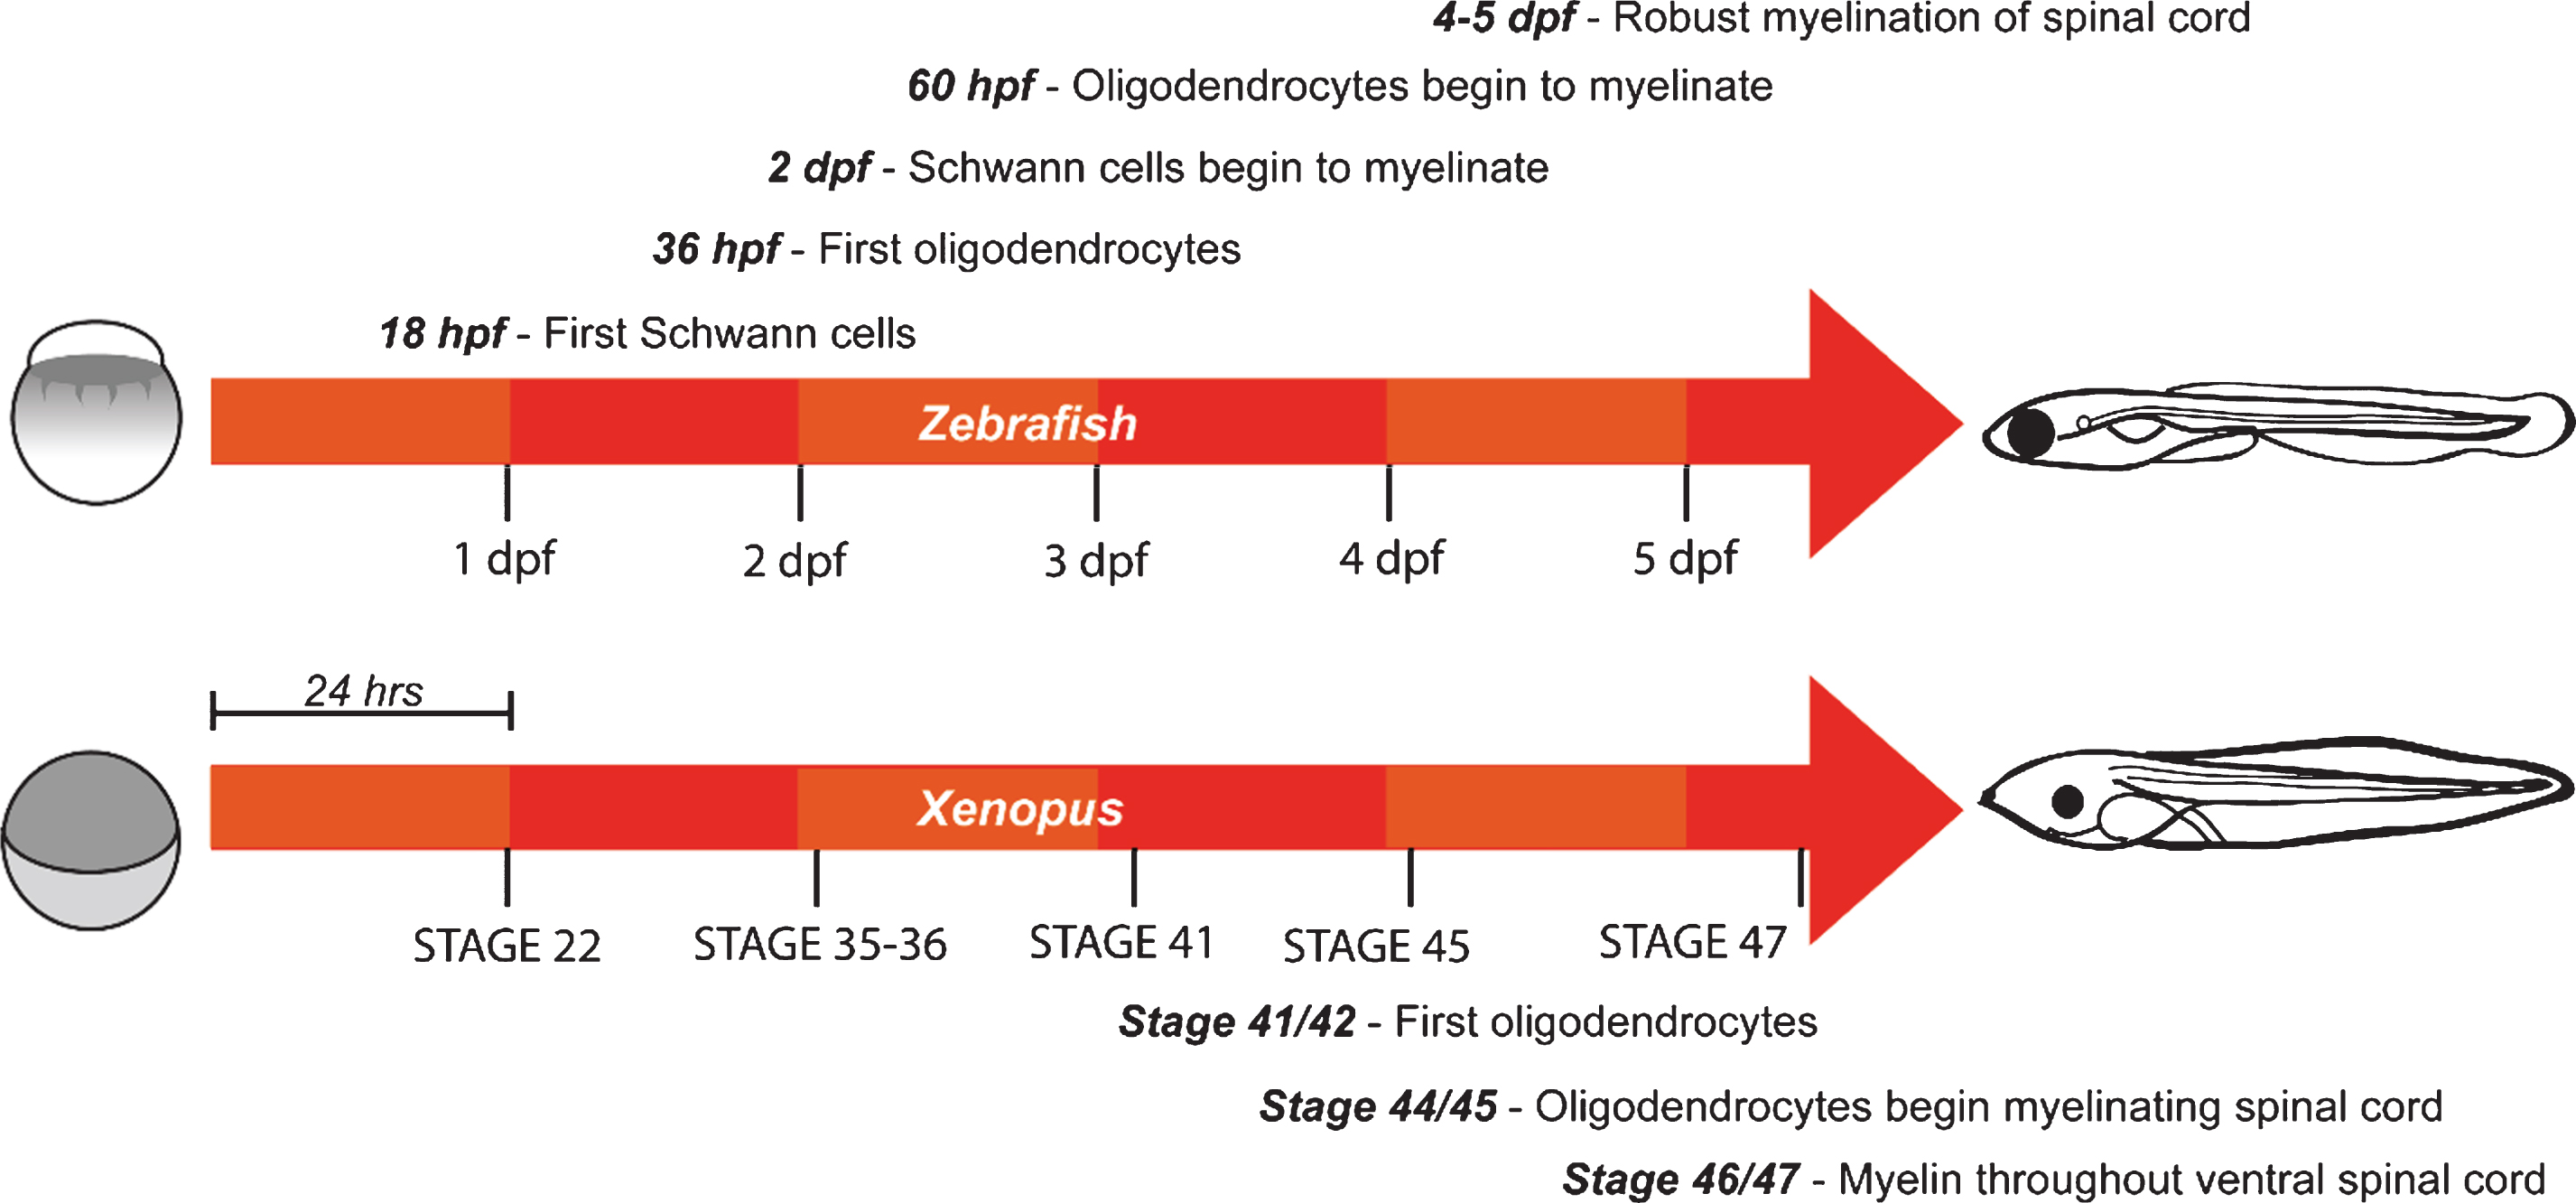 Timeline of developmental myelination in zebrafish larvae and Xenopus tadpoles. Schematic indicates rapid development of zebrafish and Xenopus embryos from one cell stage (left) to larvae (right) with myelinated axons. hpf = hours post fertilisation. dpf = days post fertilisation.